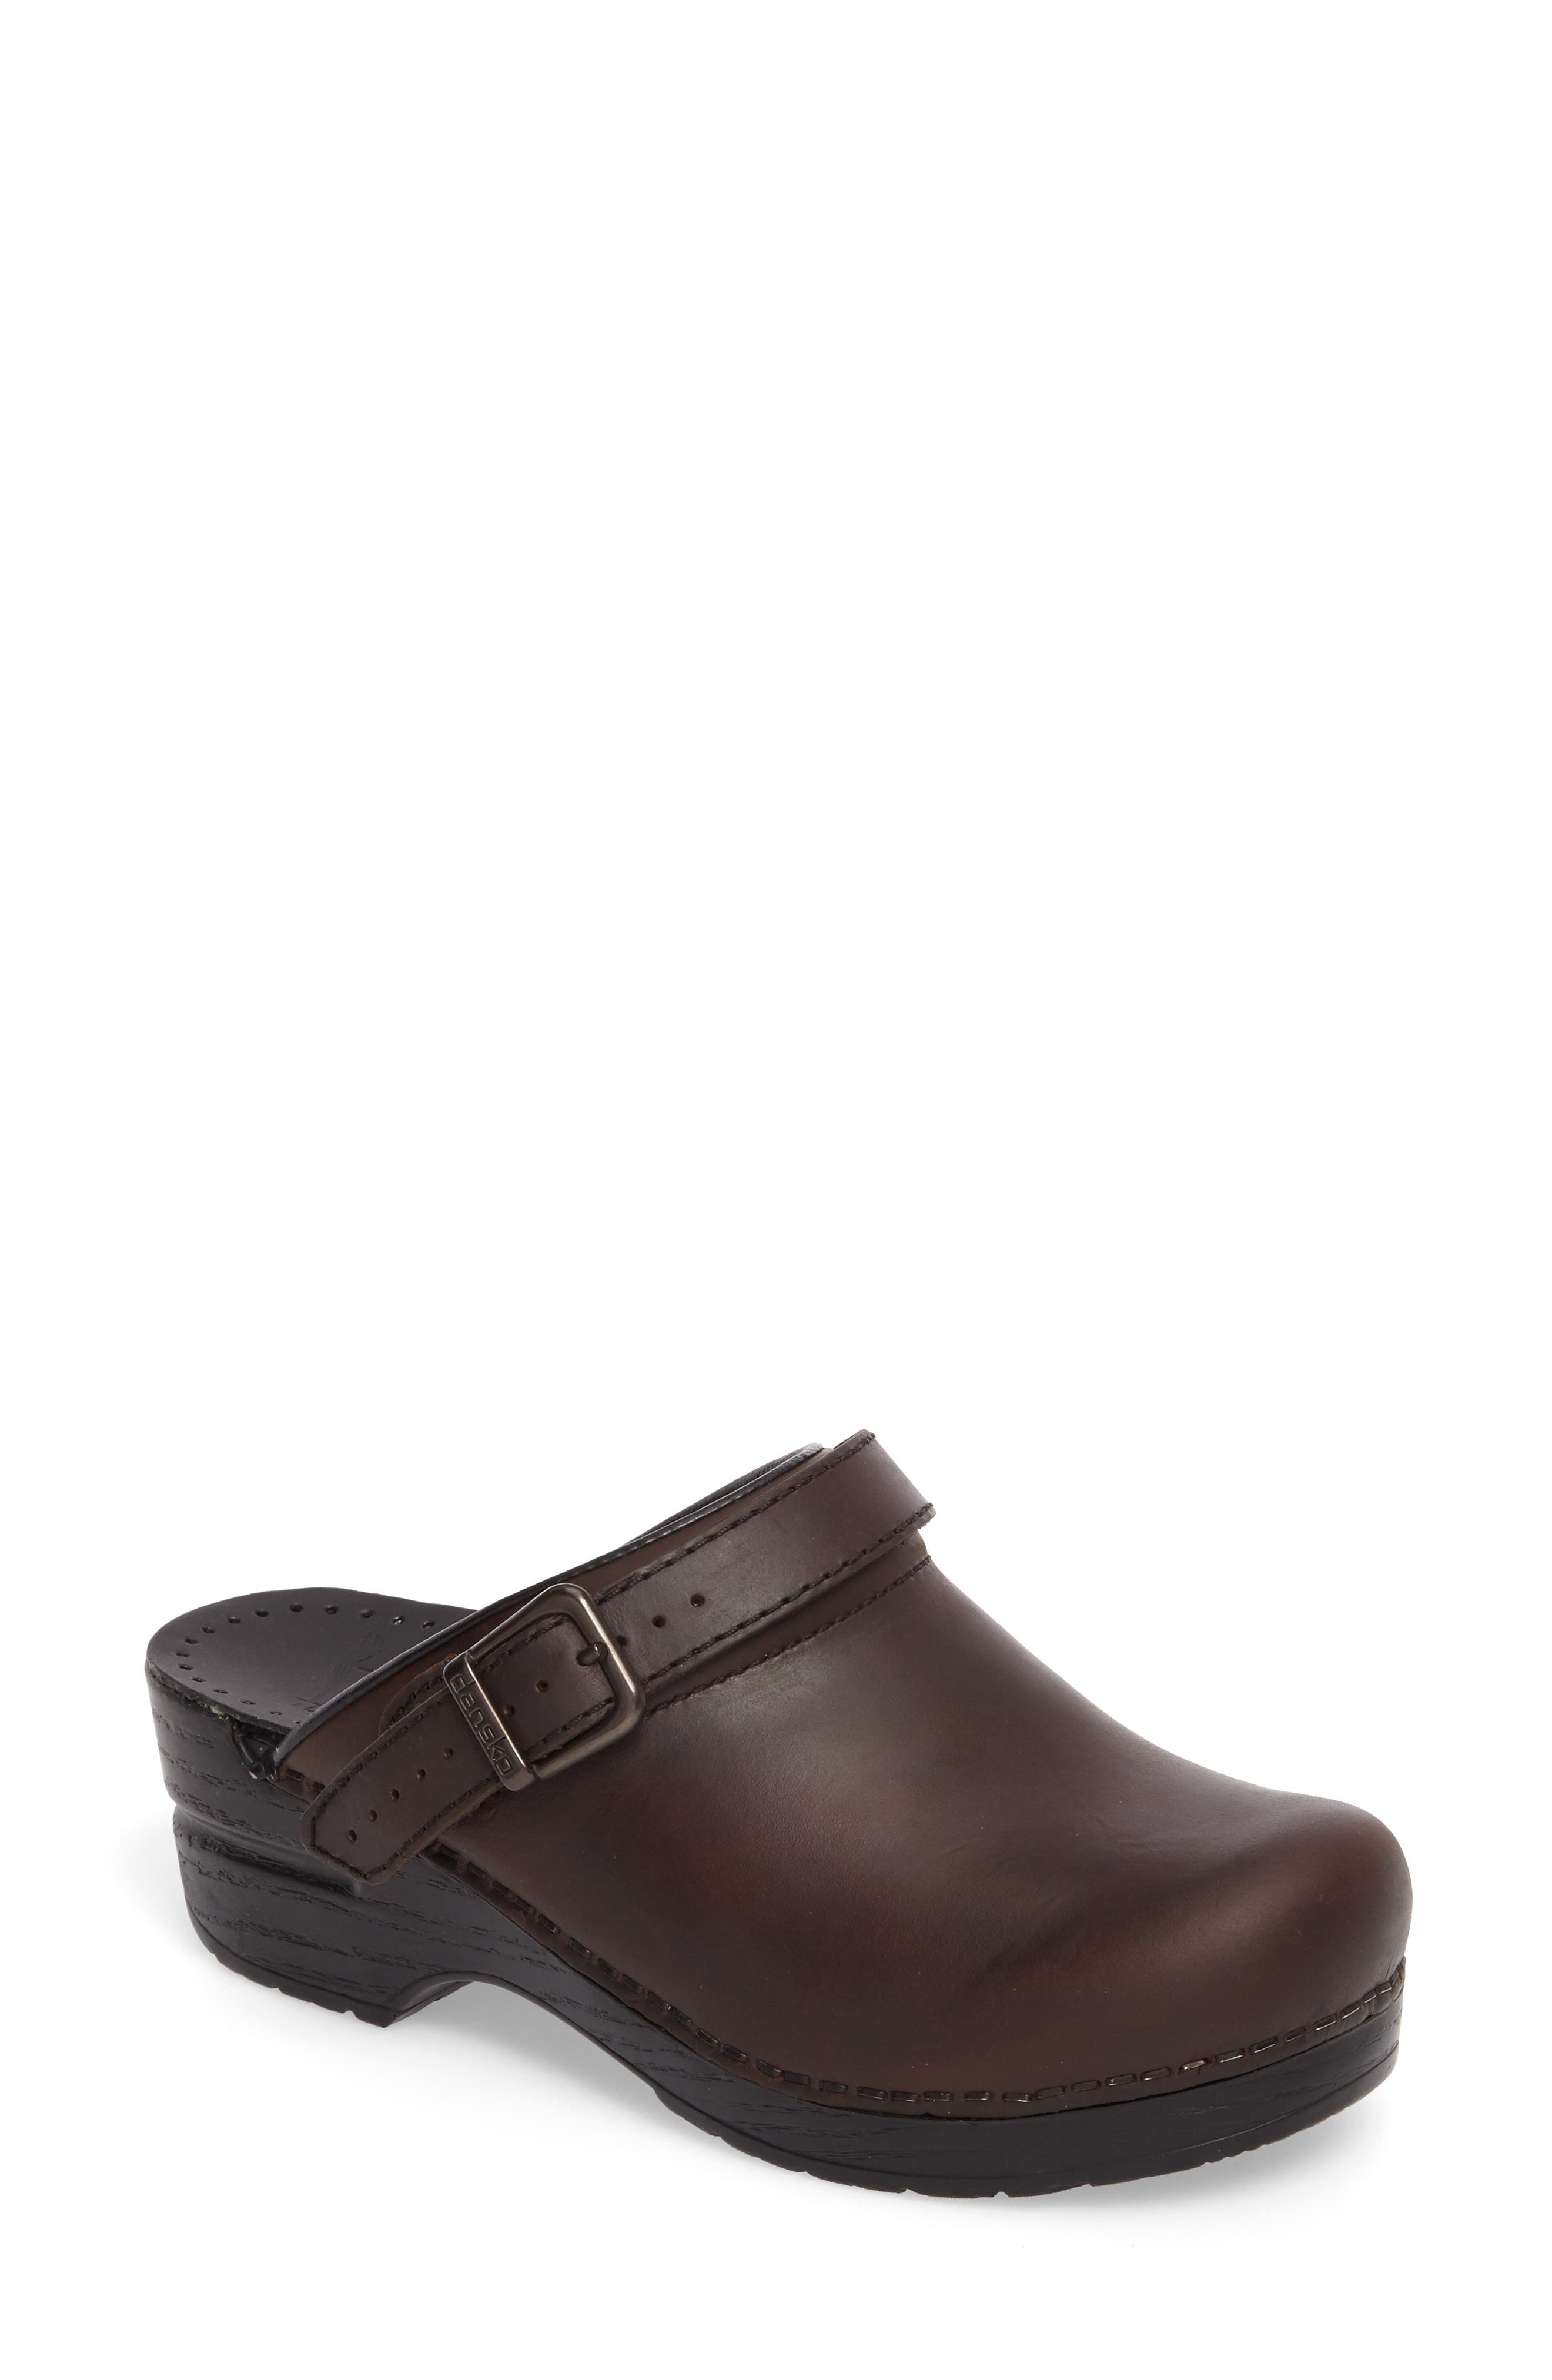 womens brown leather clogs